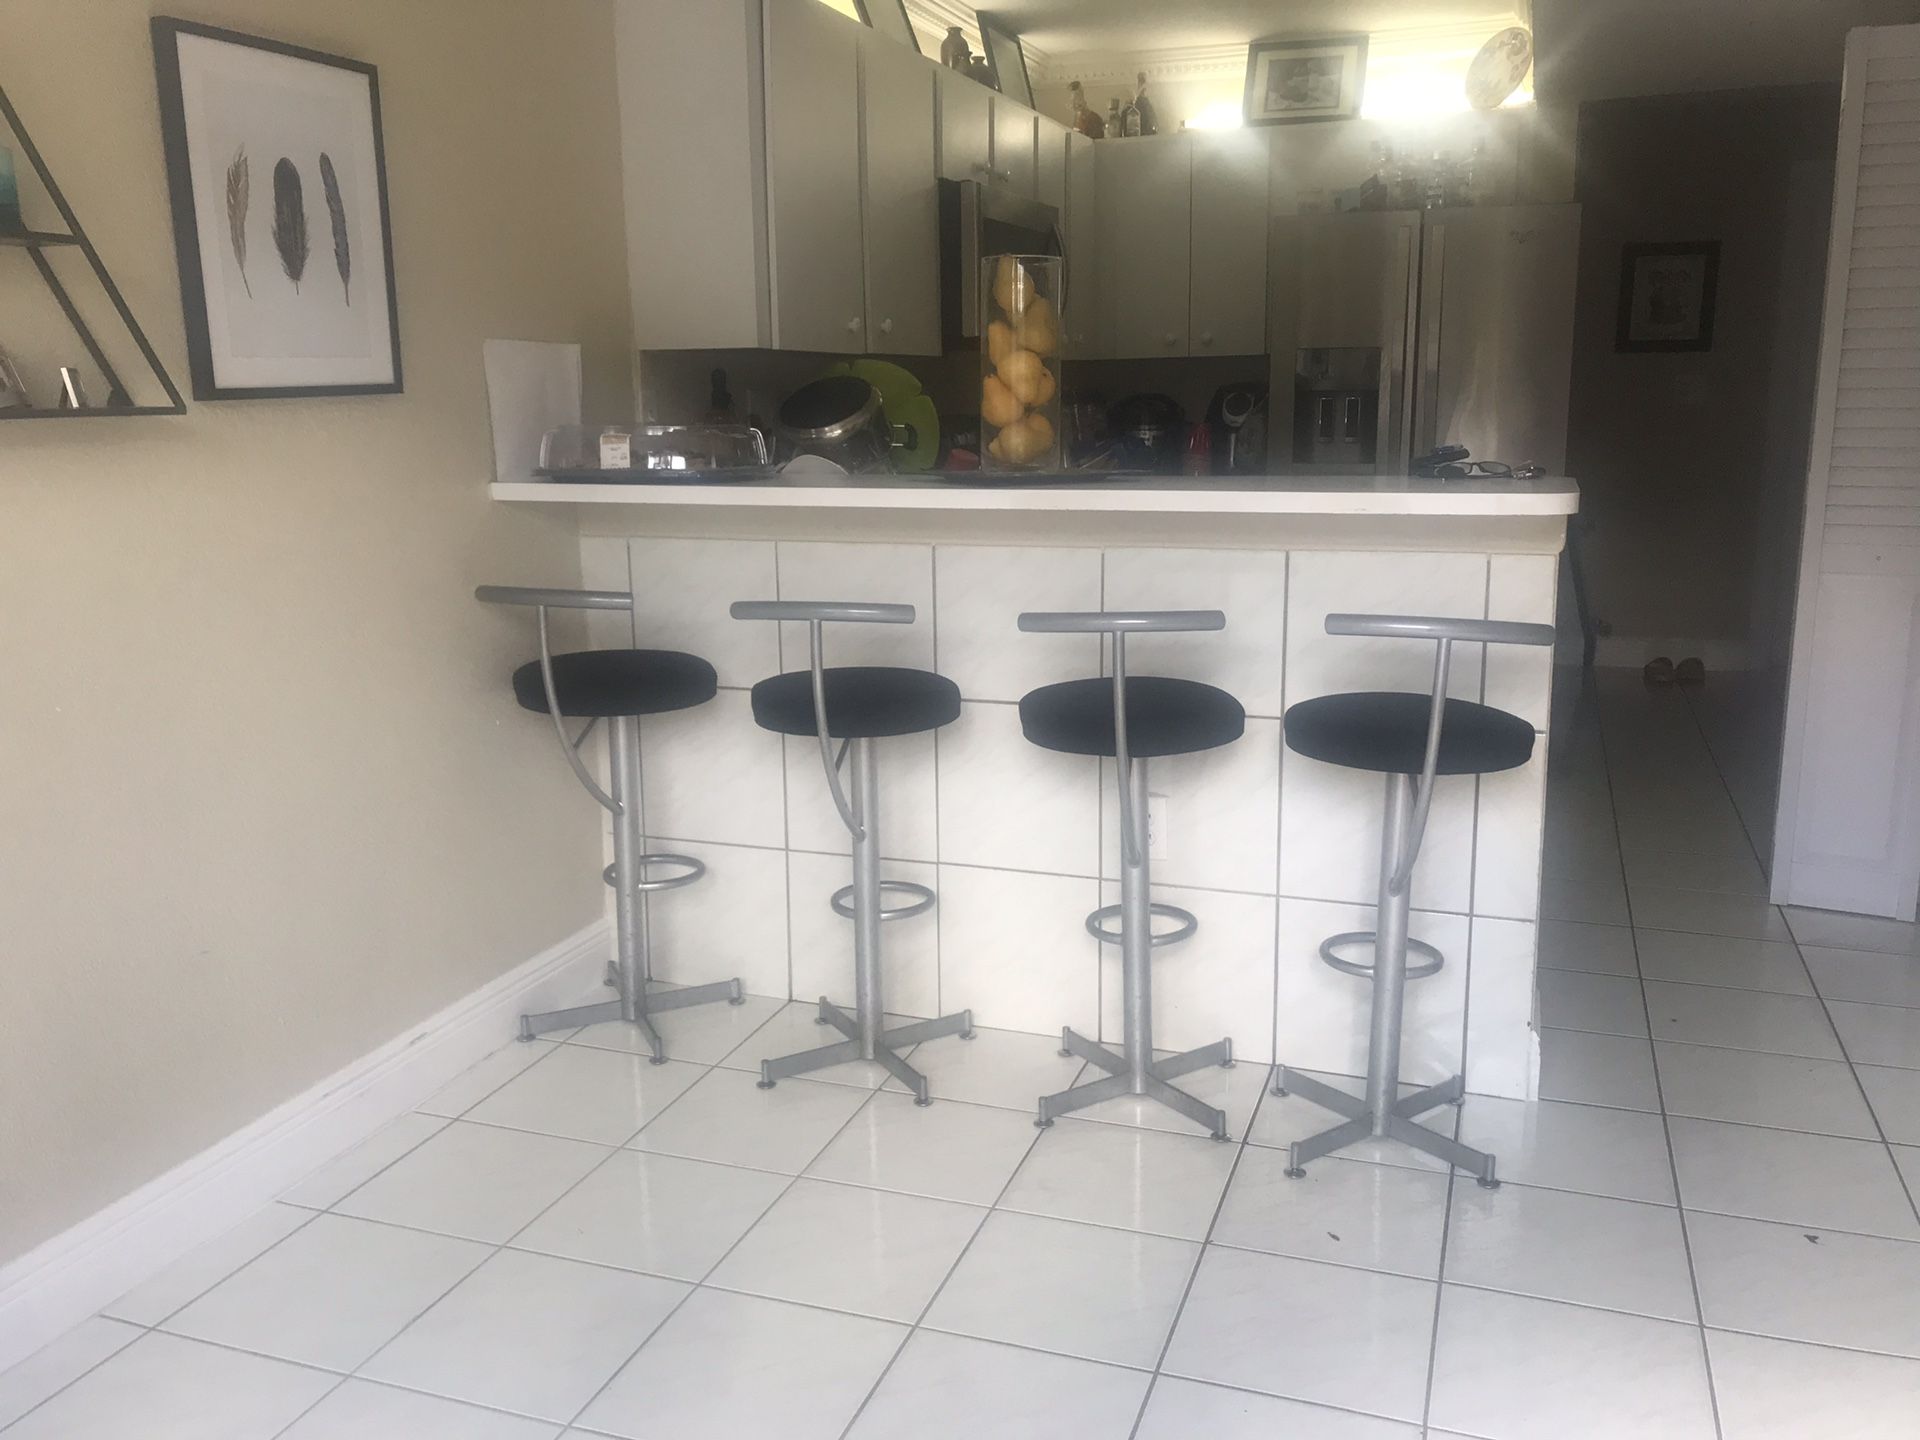 Barstools all 4 for $50